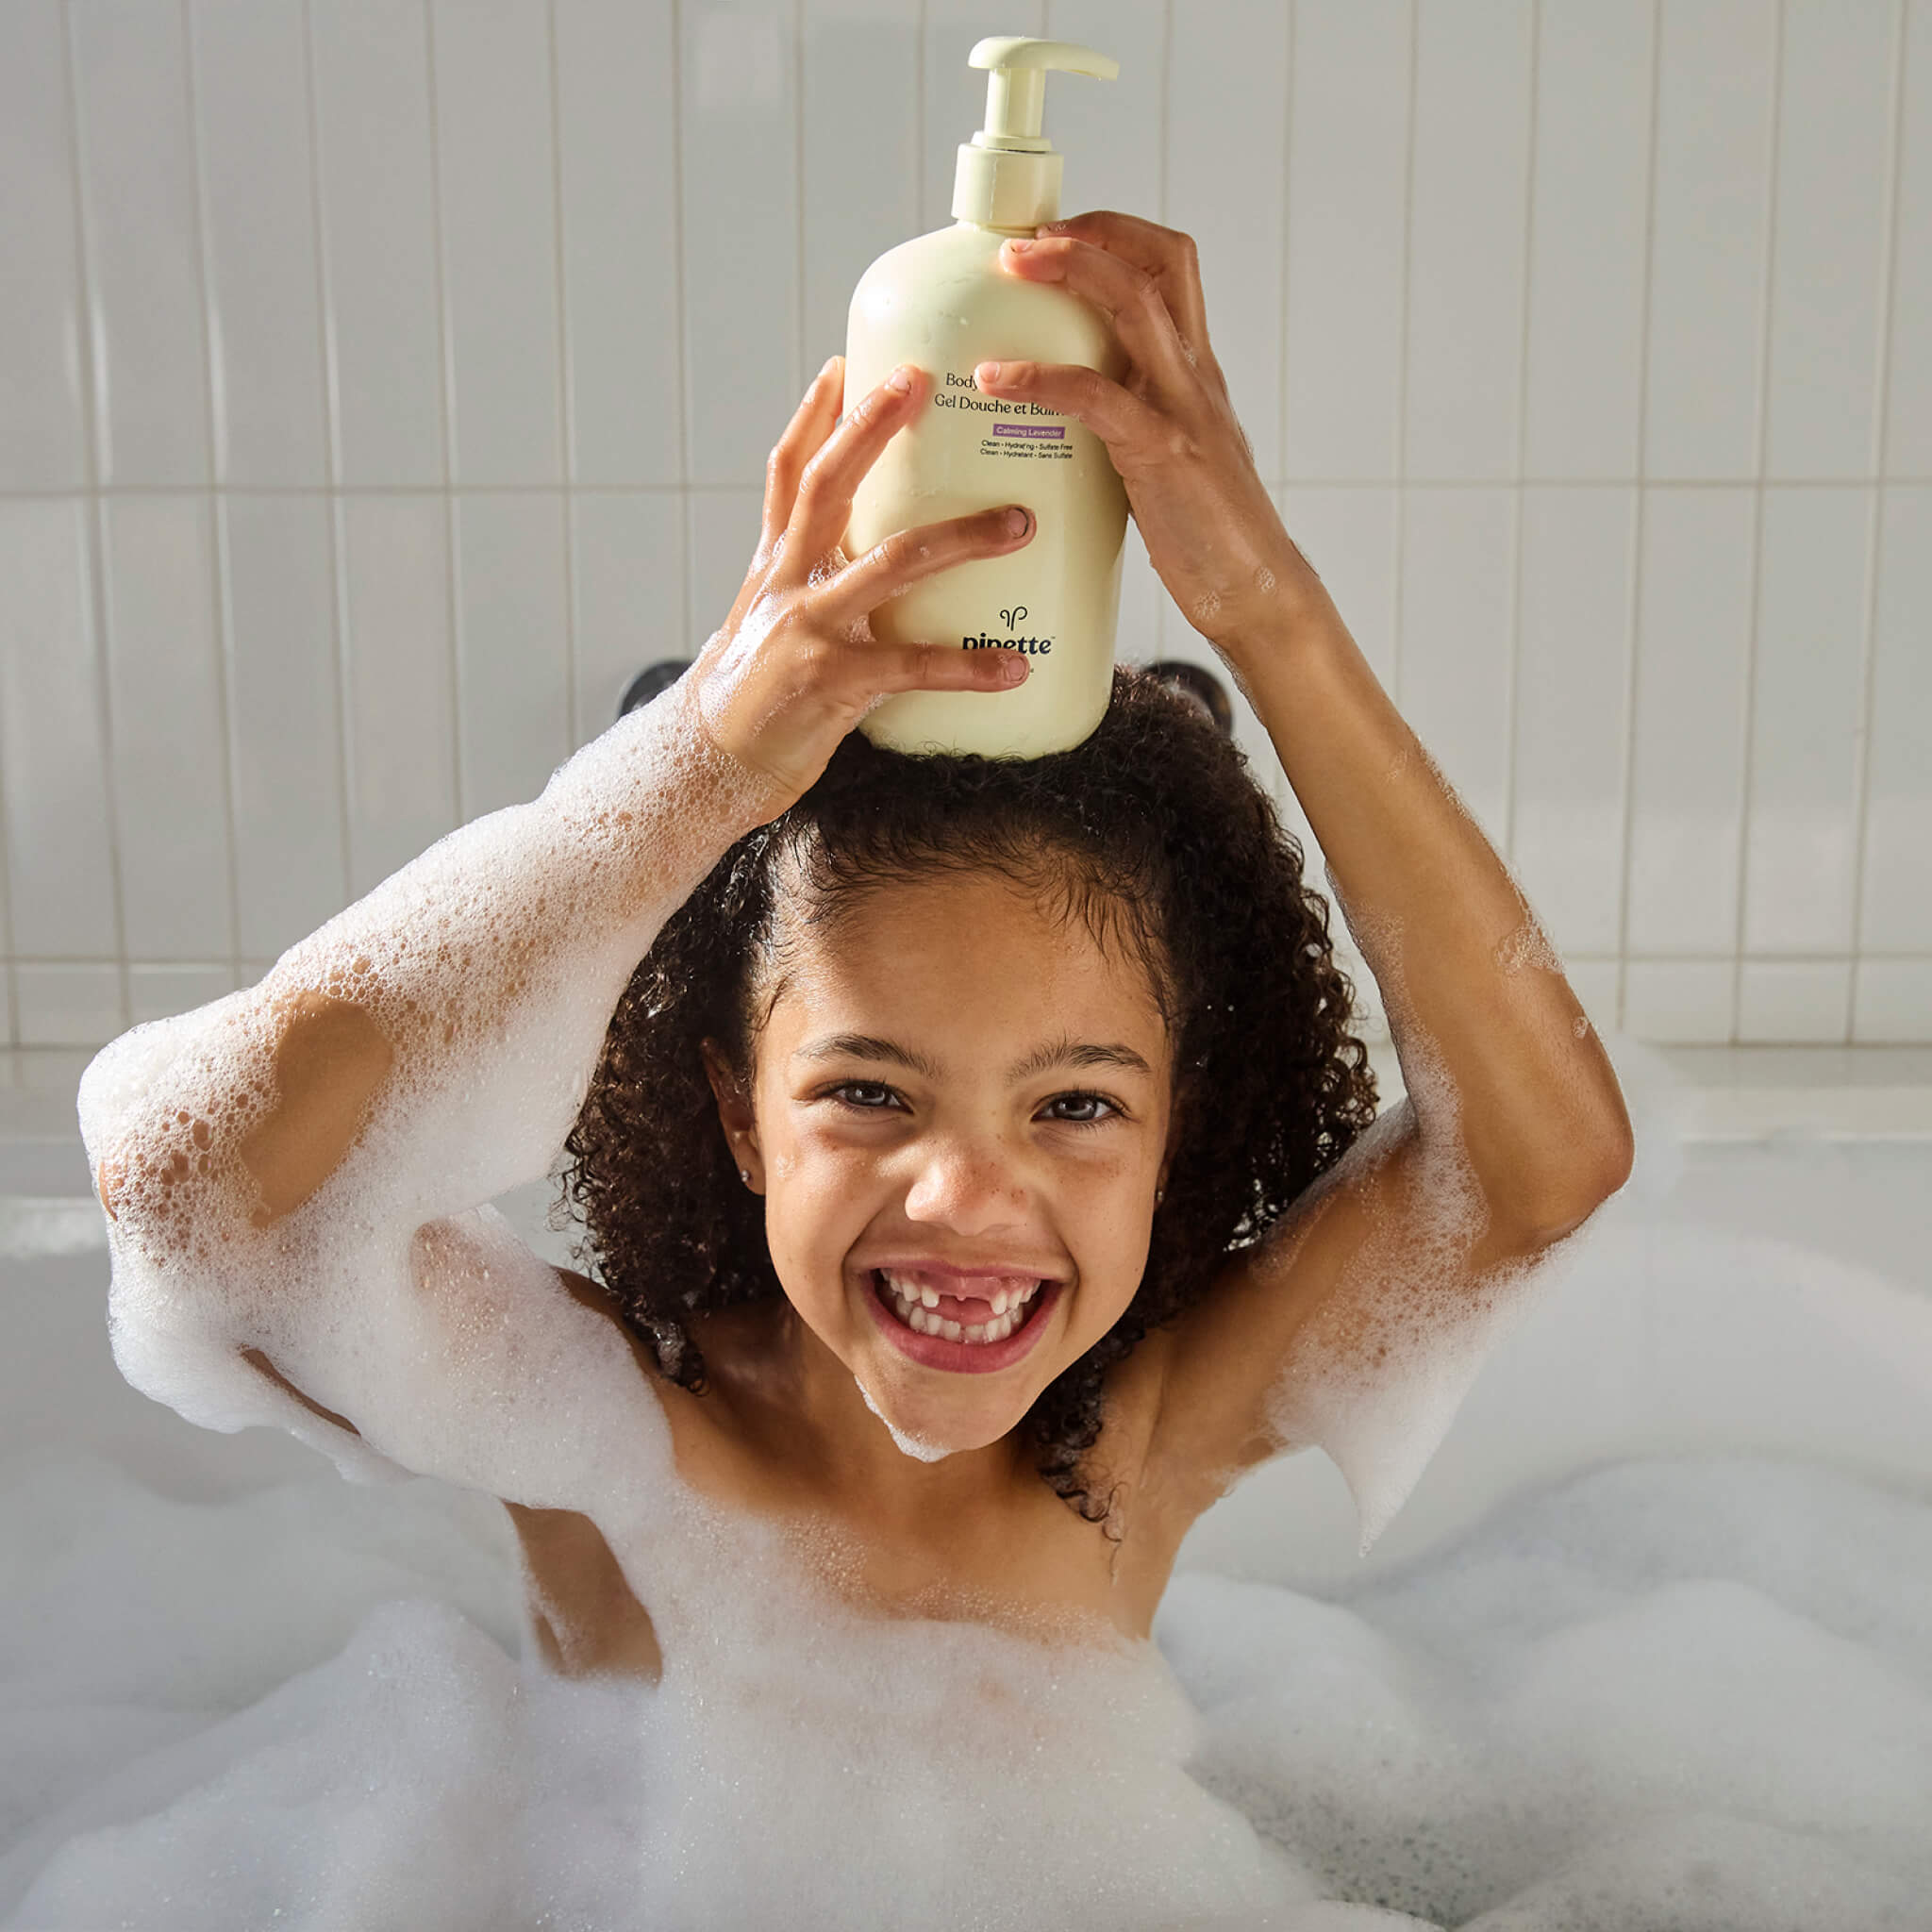 girl in shower using with bottle of body wash and bubble bath by pipette baby